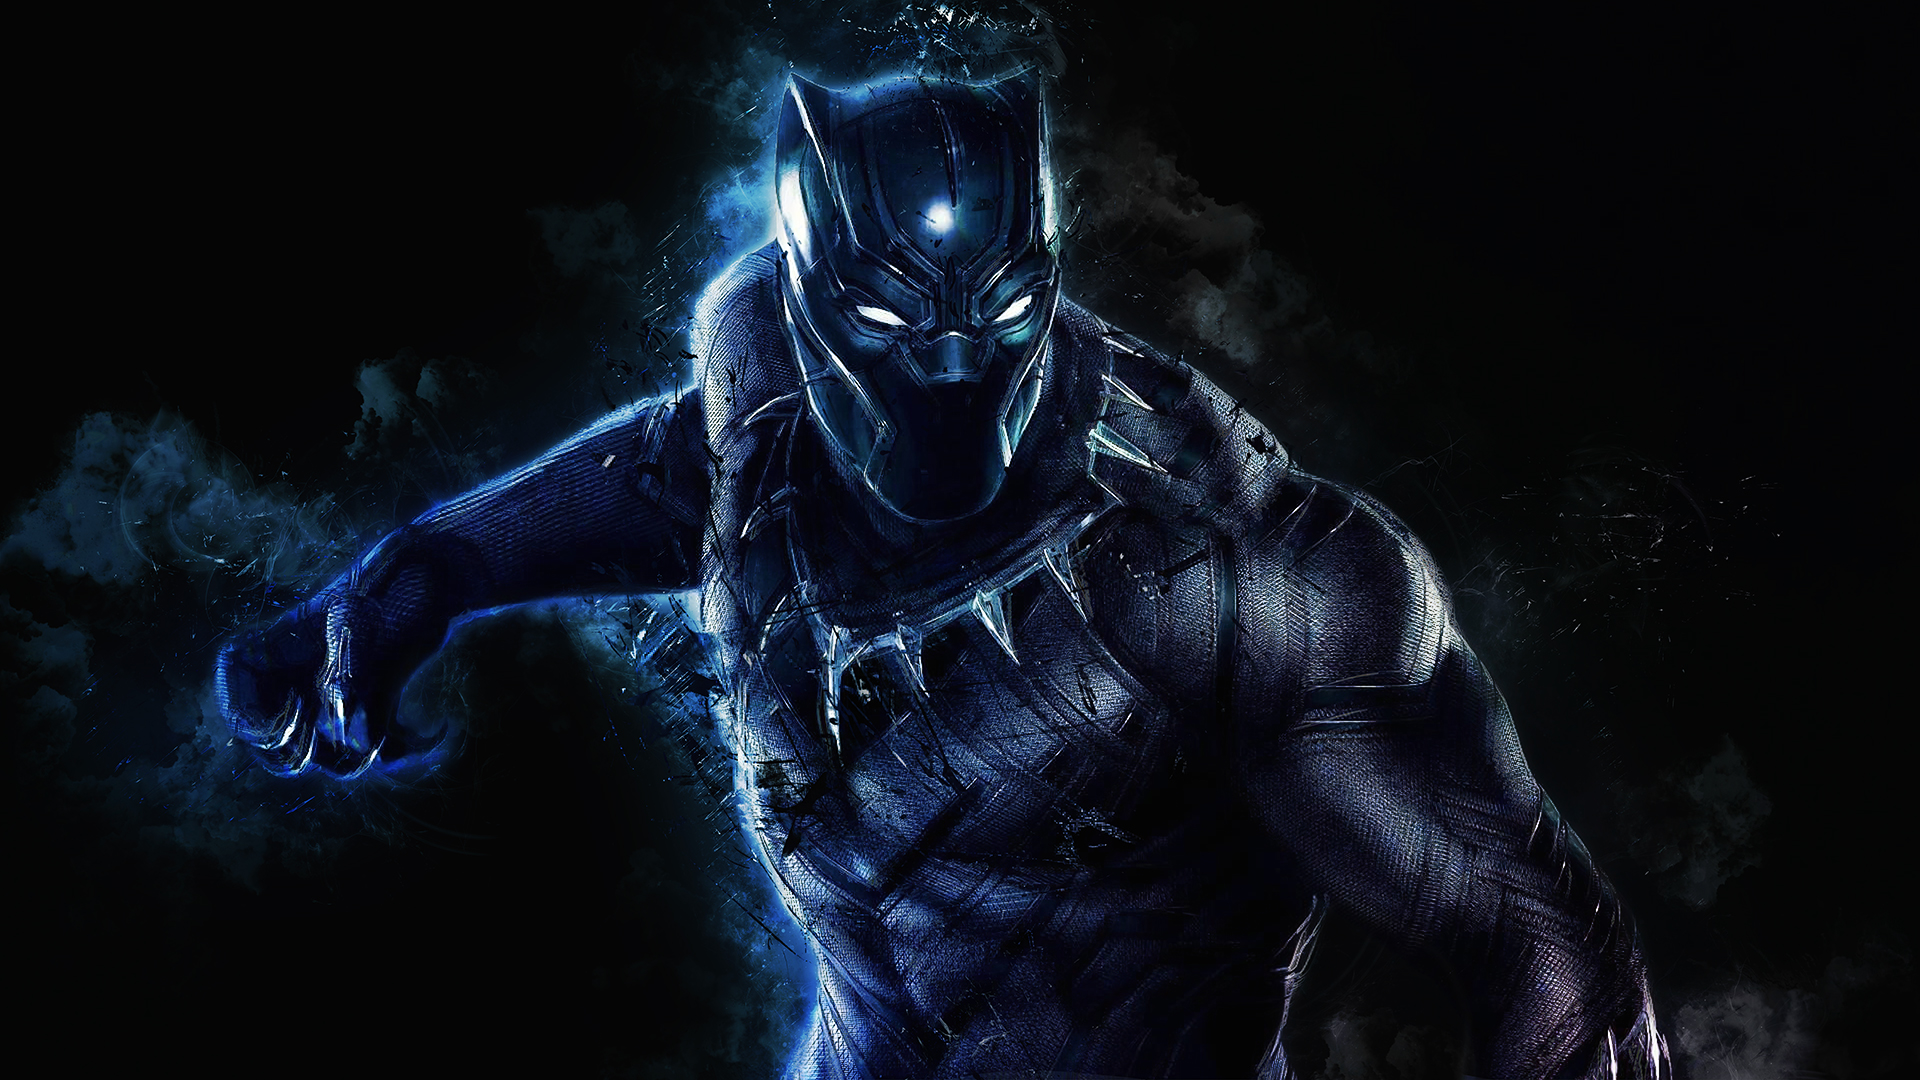 Black Panther for ios instal